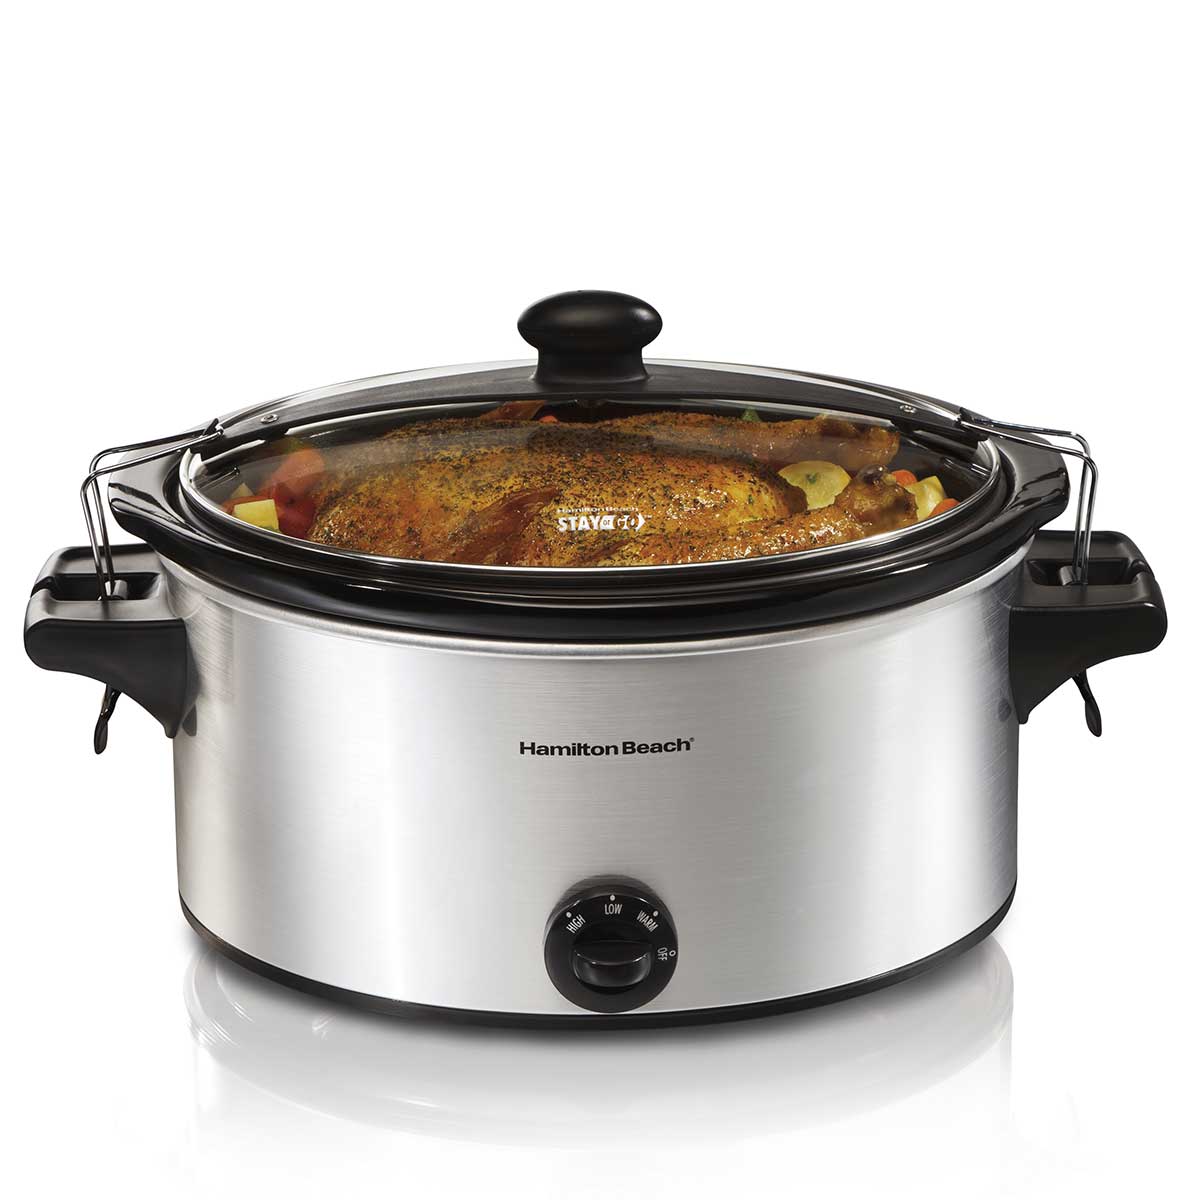 Stay warm with a slow cooker - CNET